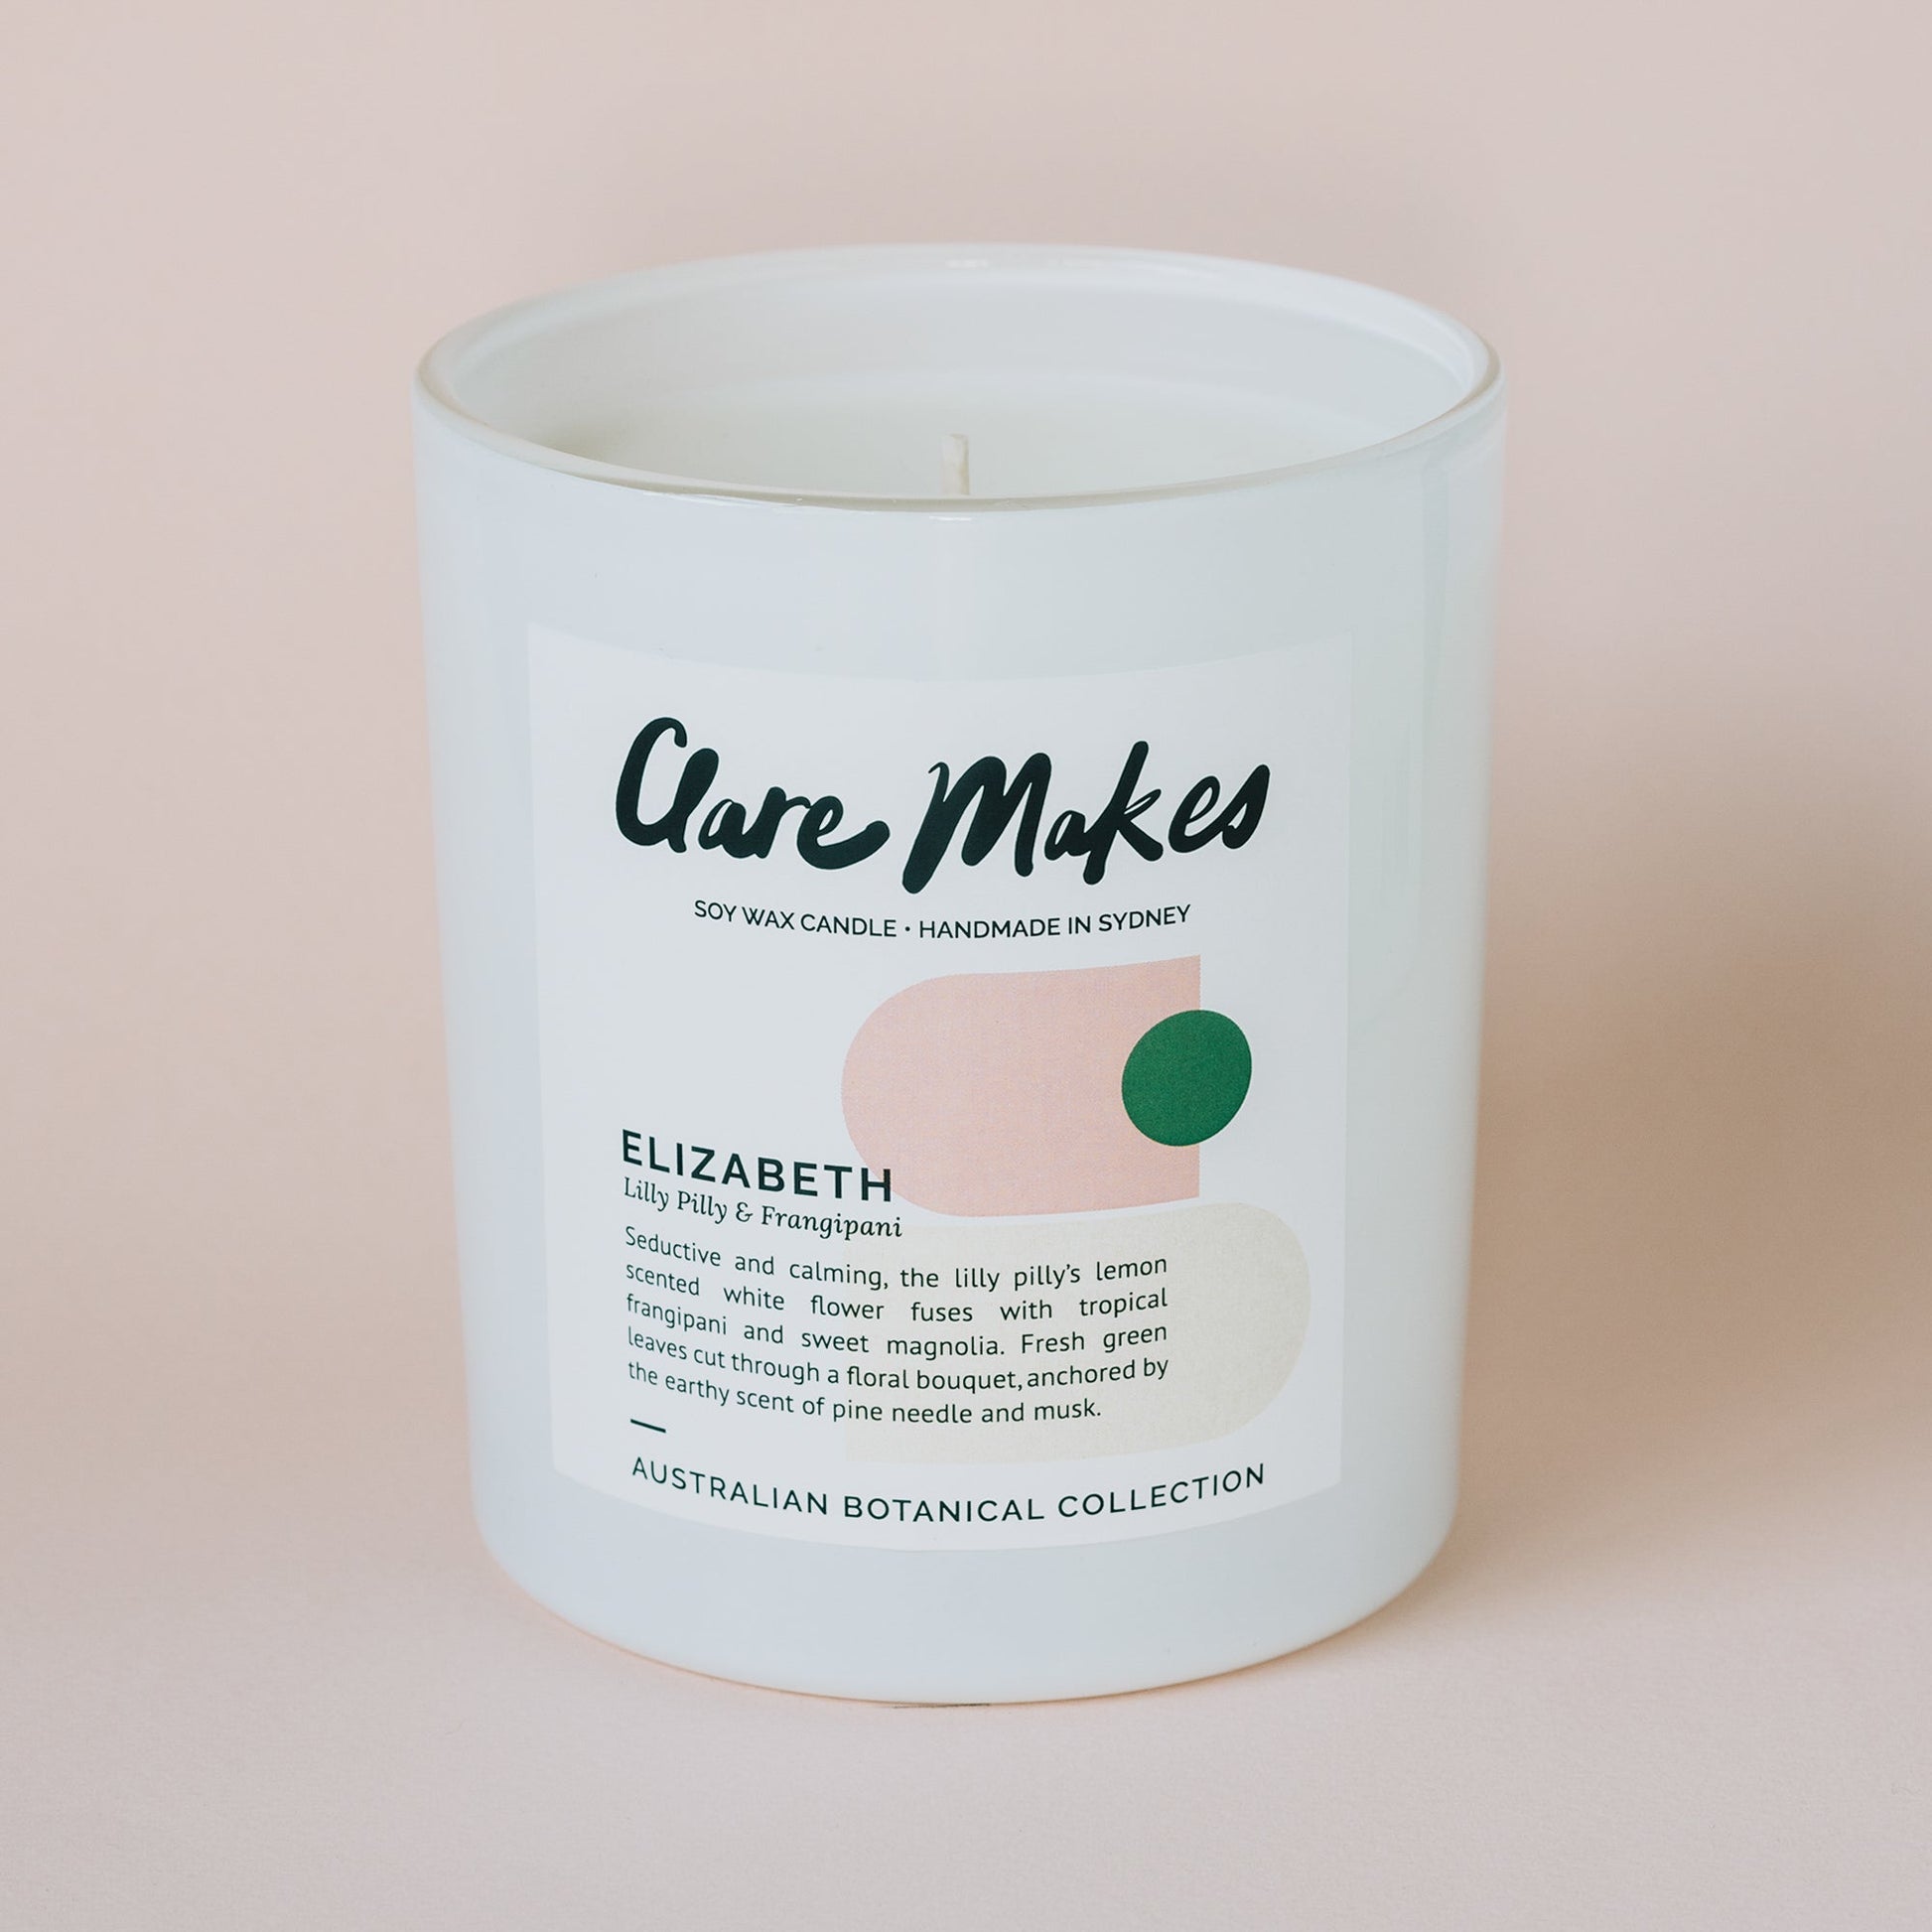 Elizabeth: Lilly Pilly & Frangipani - Clare Makes - Candle